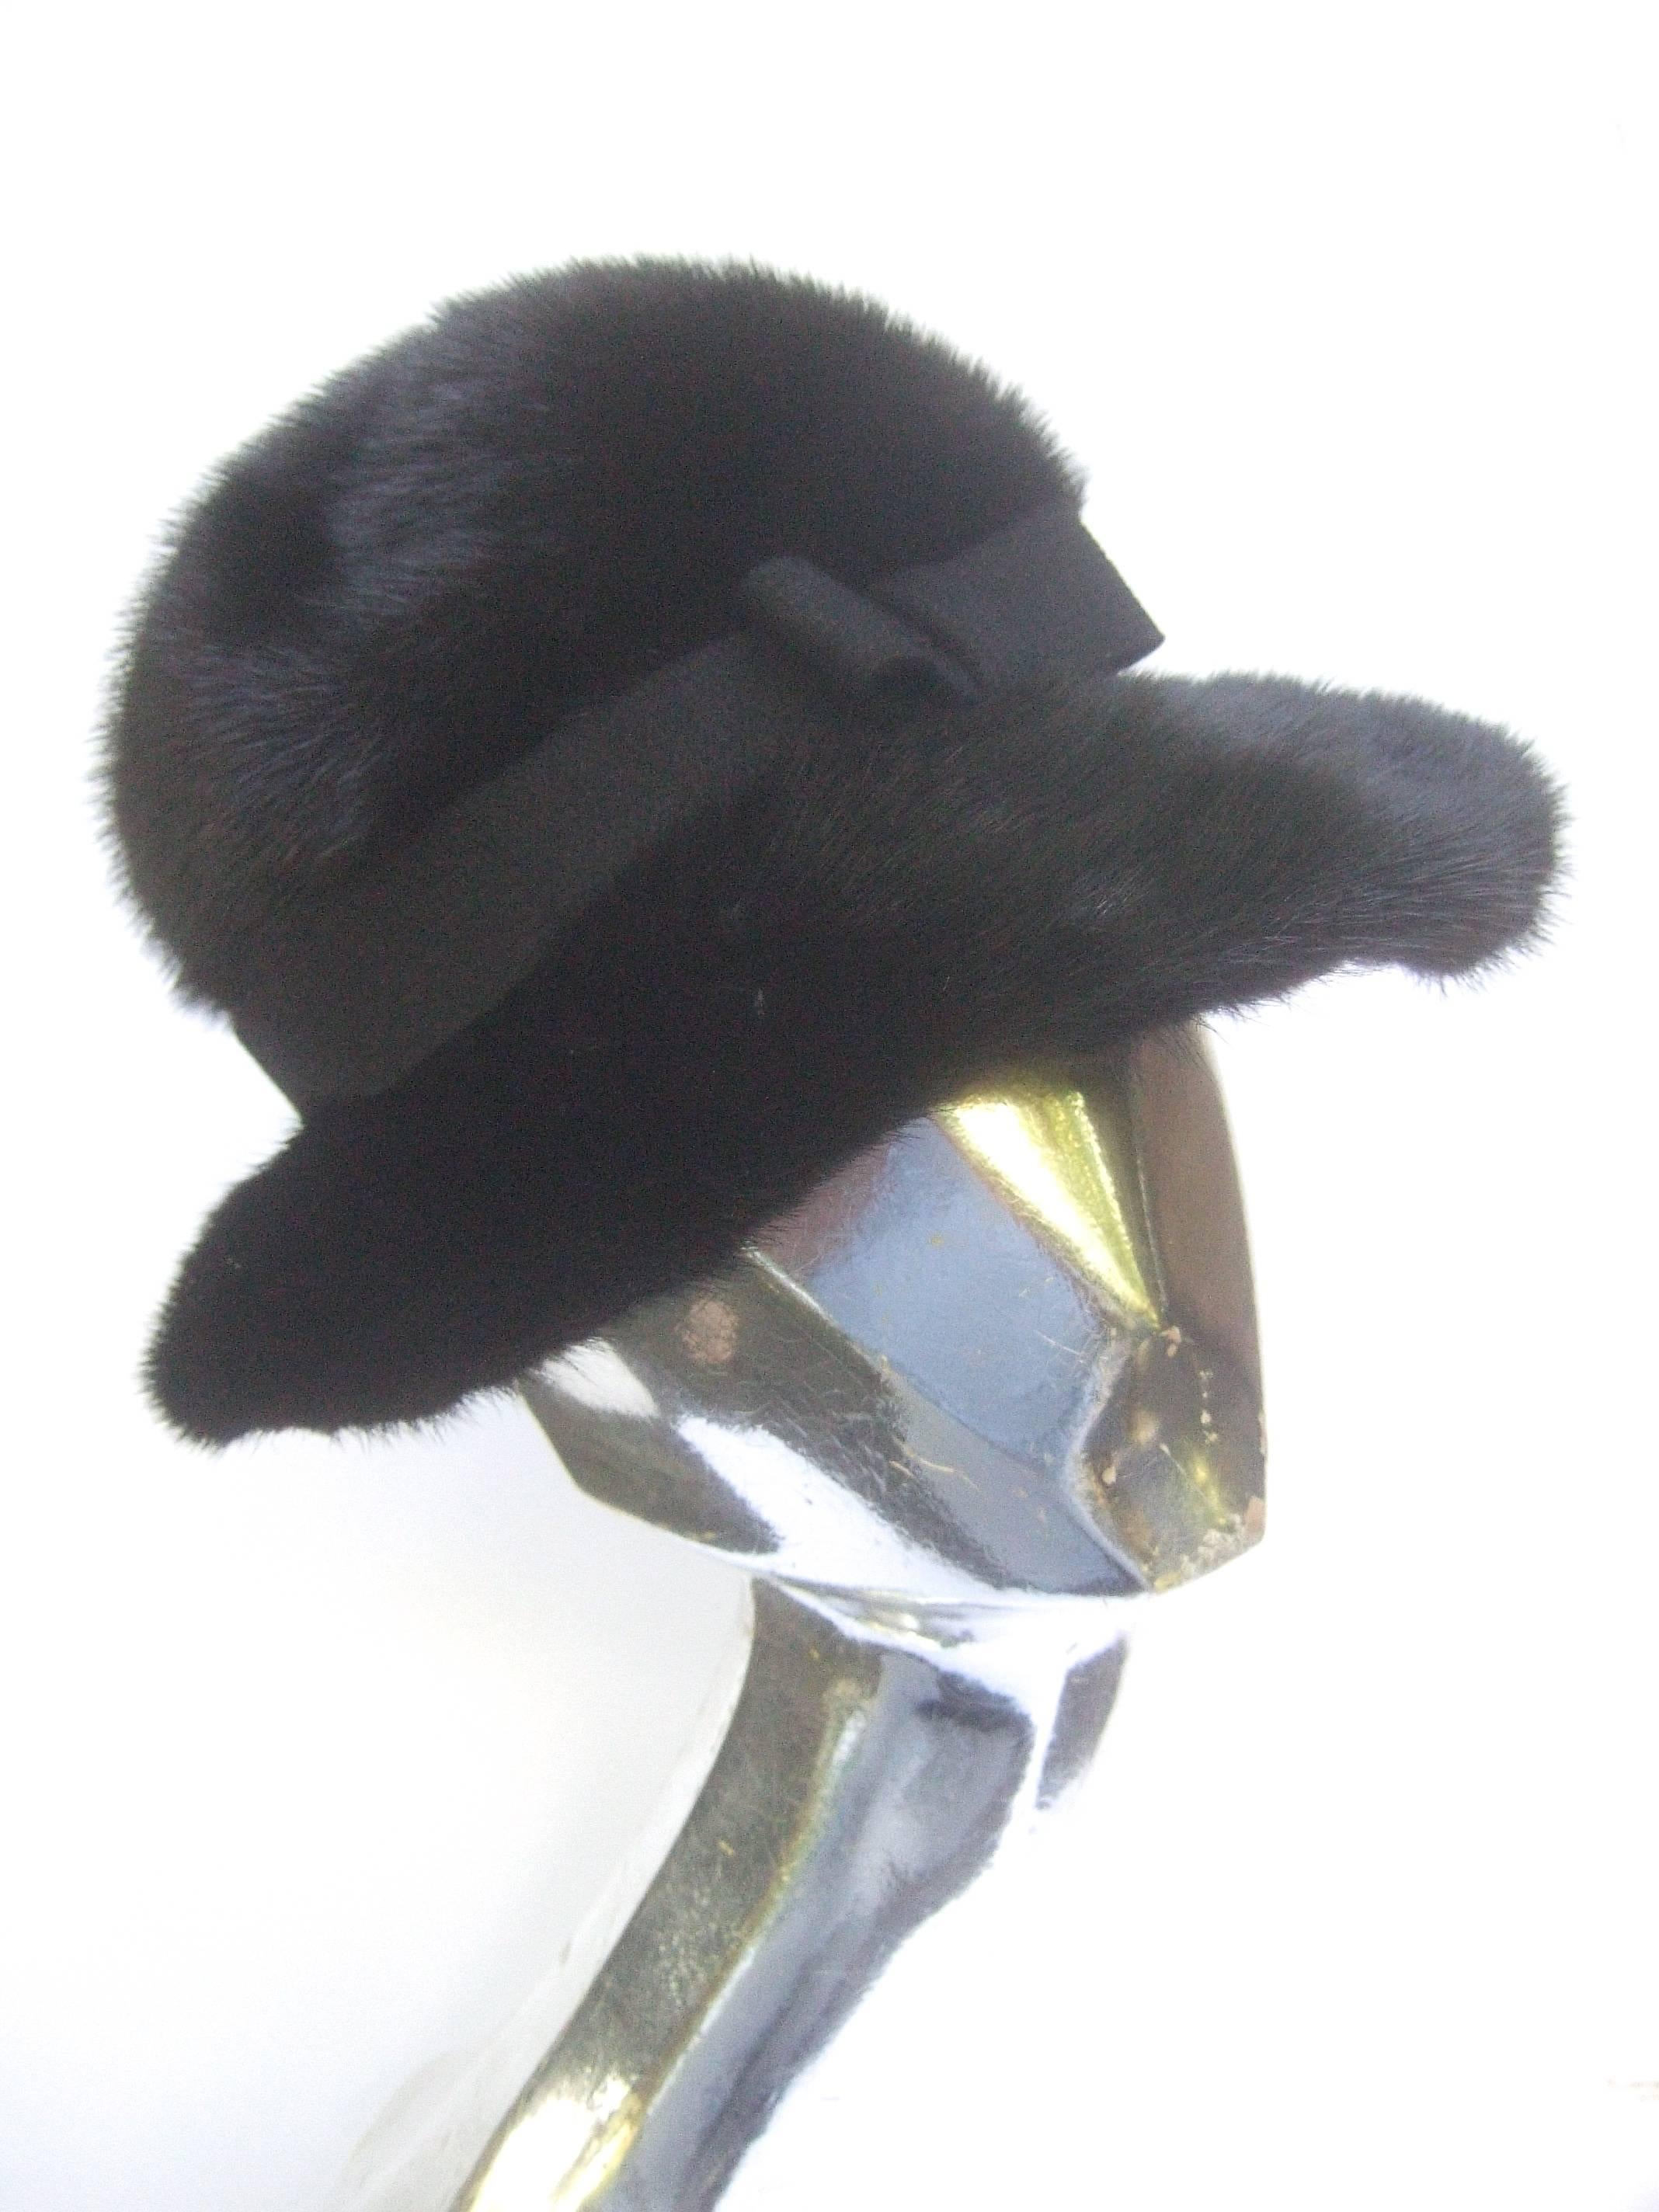 Saks Fifth Avenue Plush mink fedora style hat c 1970
The stylish retro hat is designed with lustrous dark 
brown ranch mink fur

The mahogany dark brown mink fur hat is embellished
with a subtle black ribbon that circles around the head
tied into